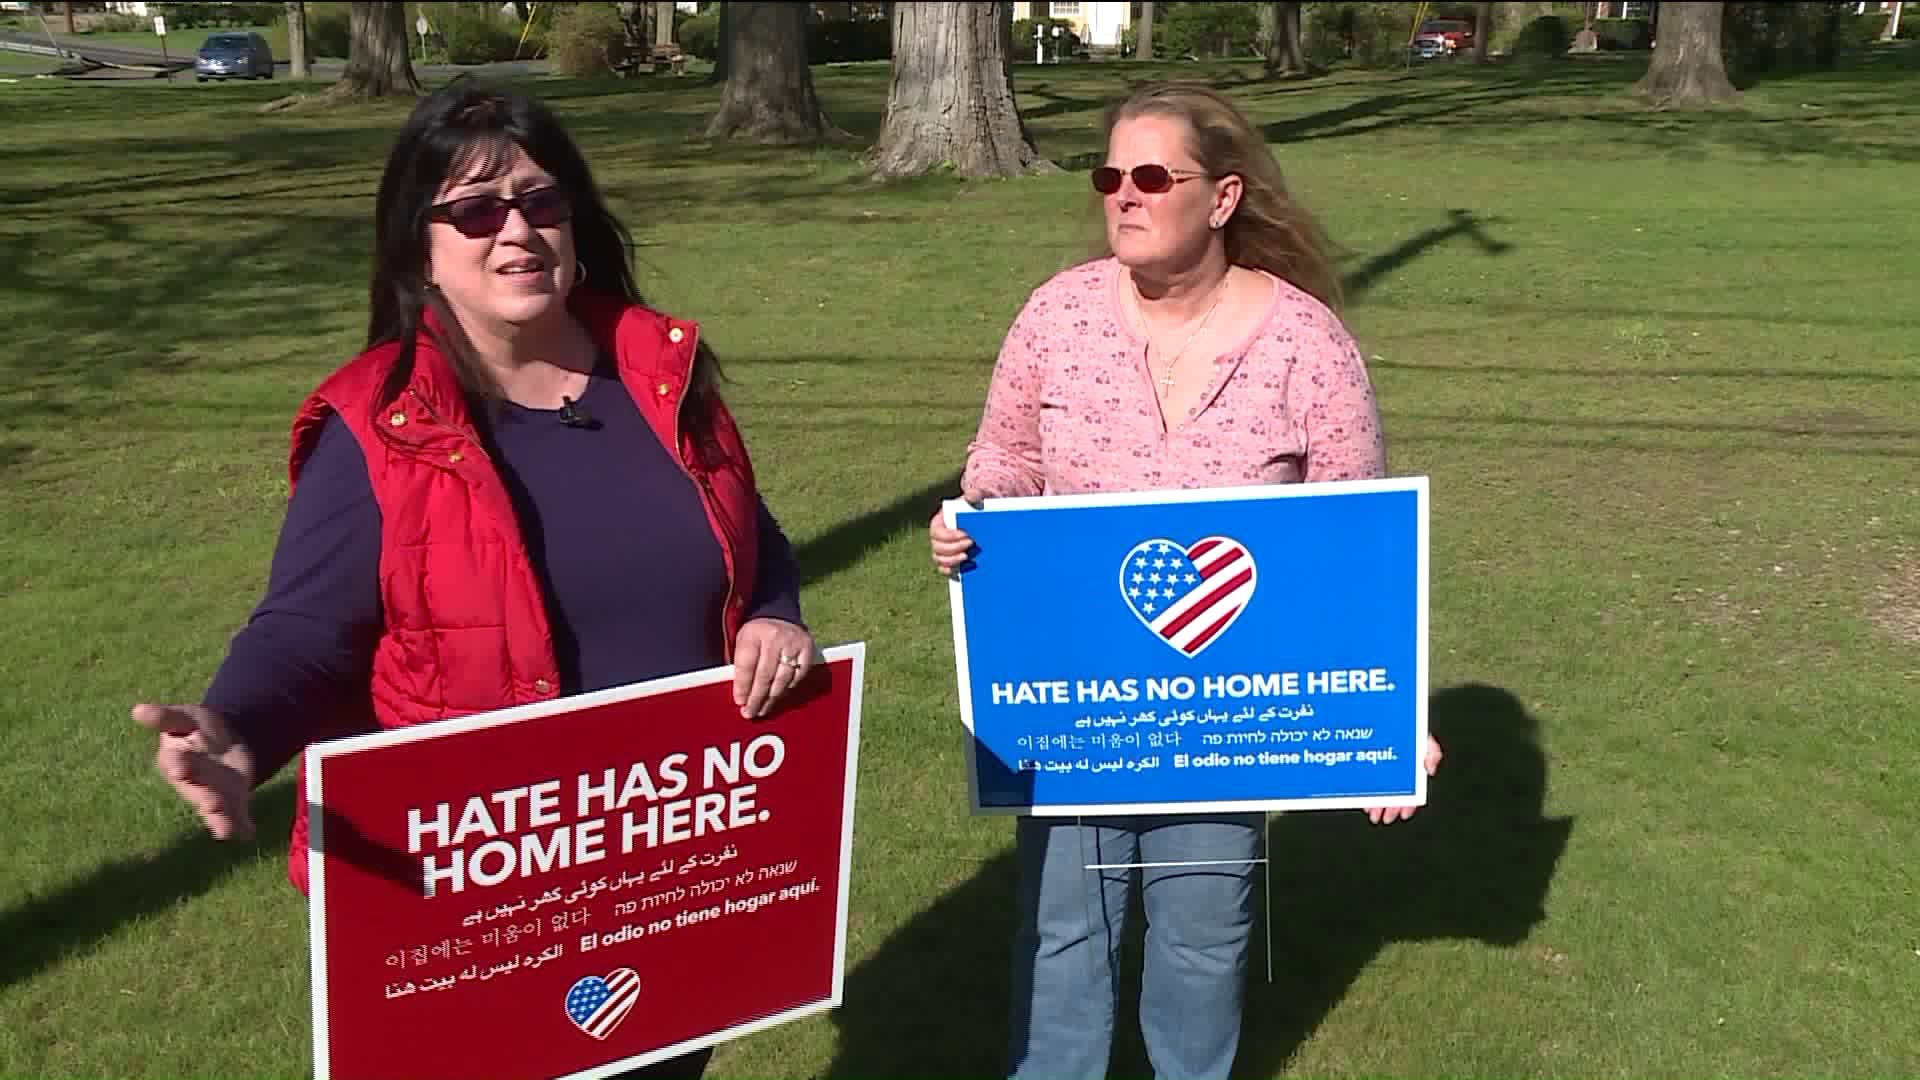 `Hate Has No Home Here` finds a home on lawns in Connecticut